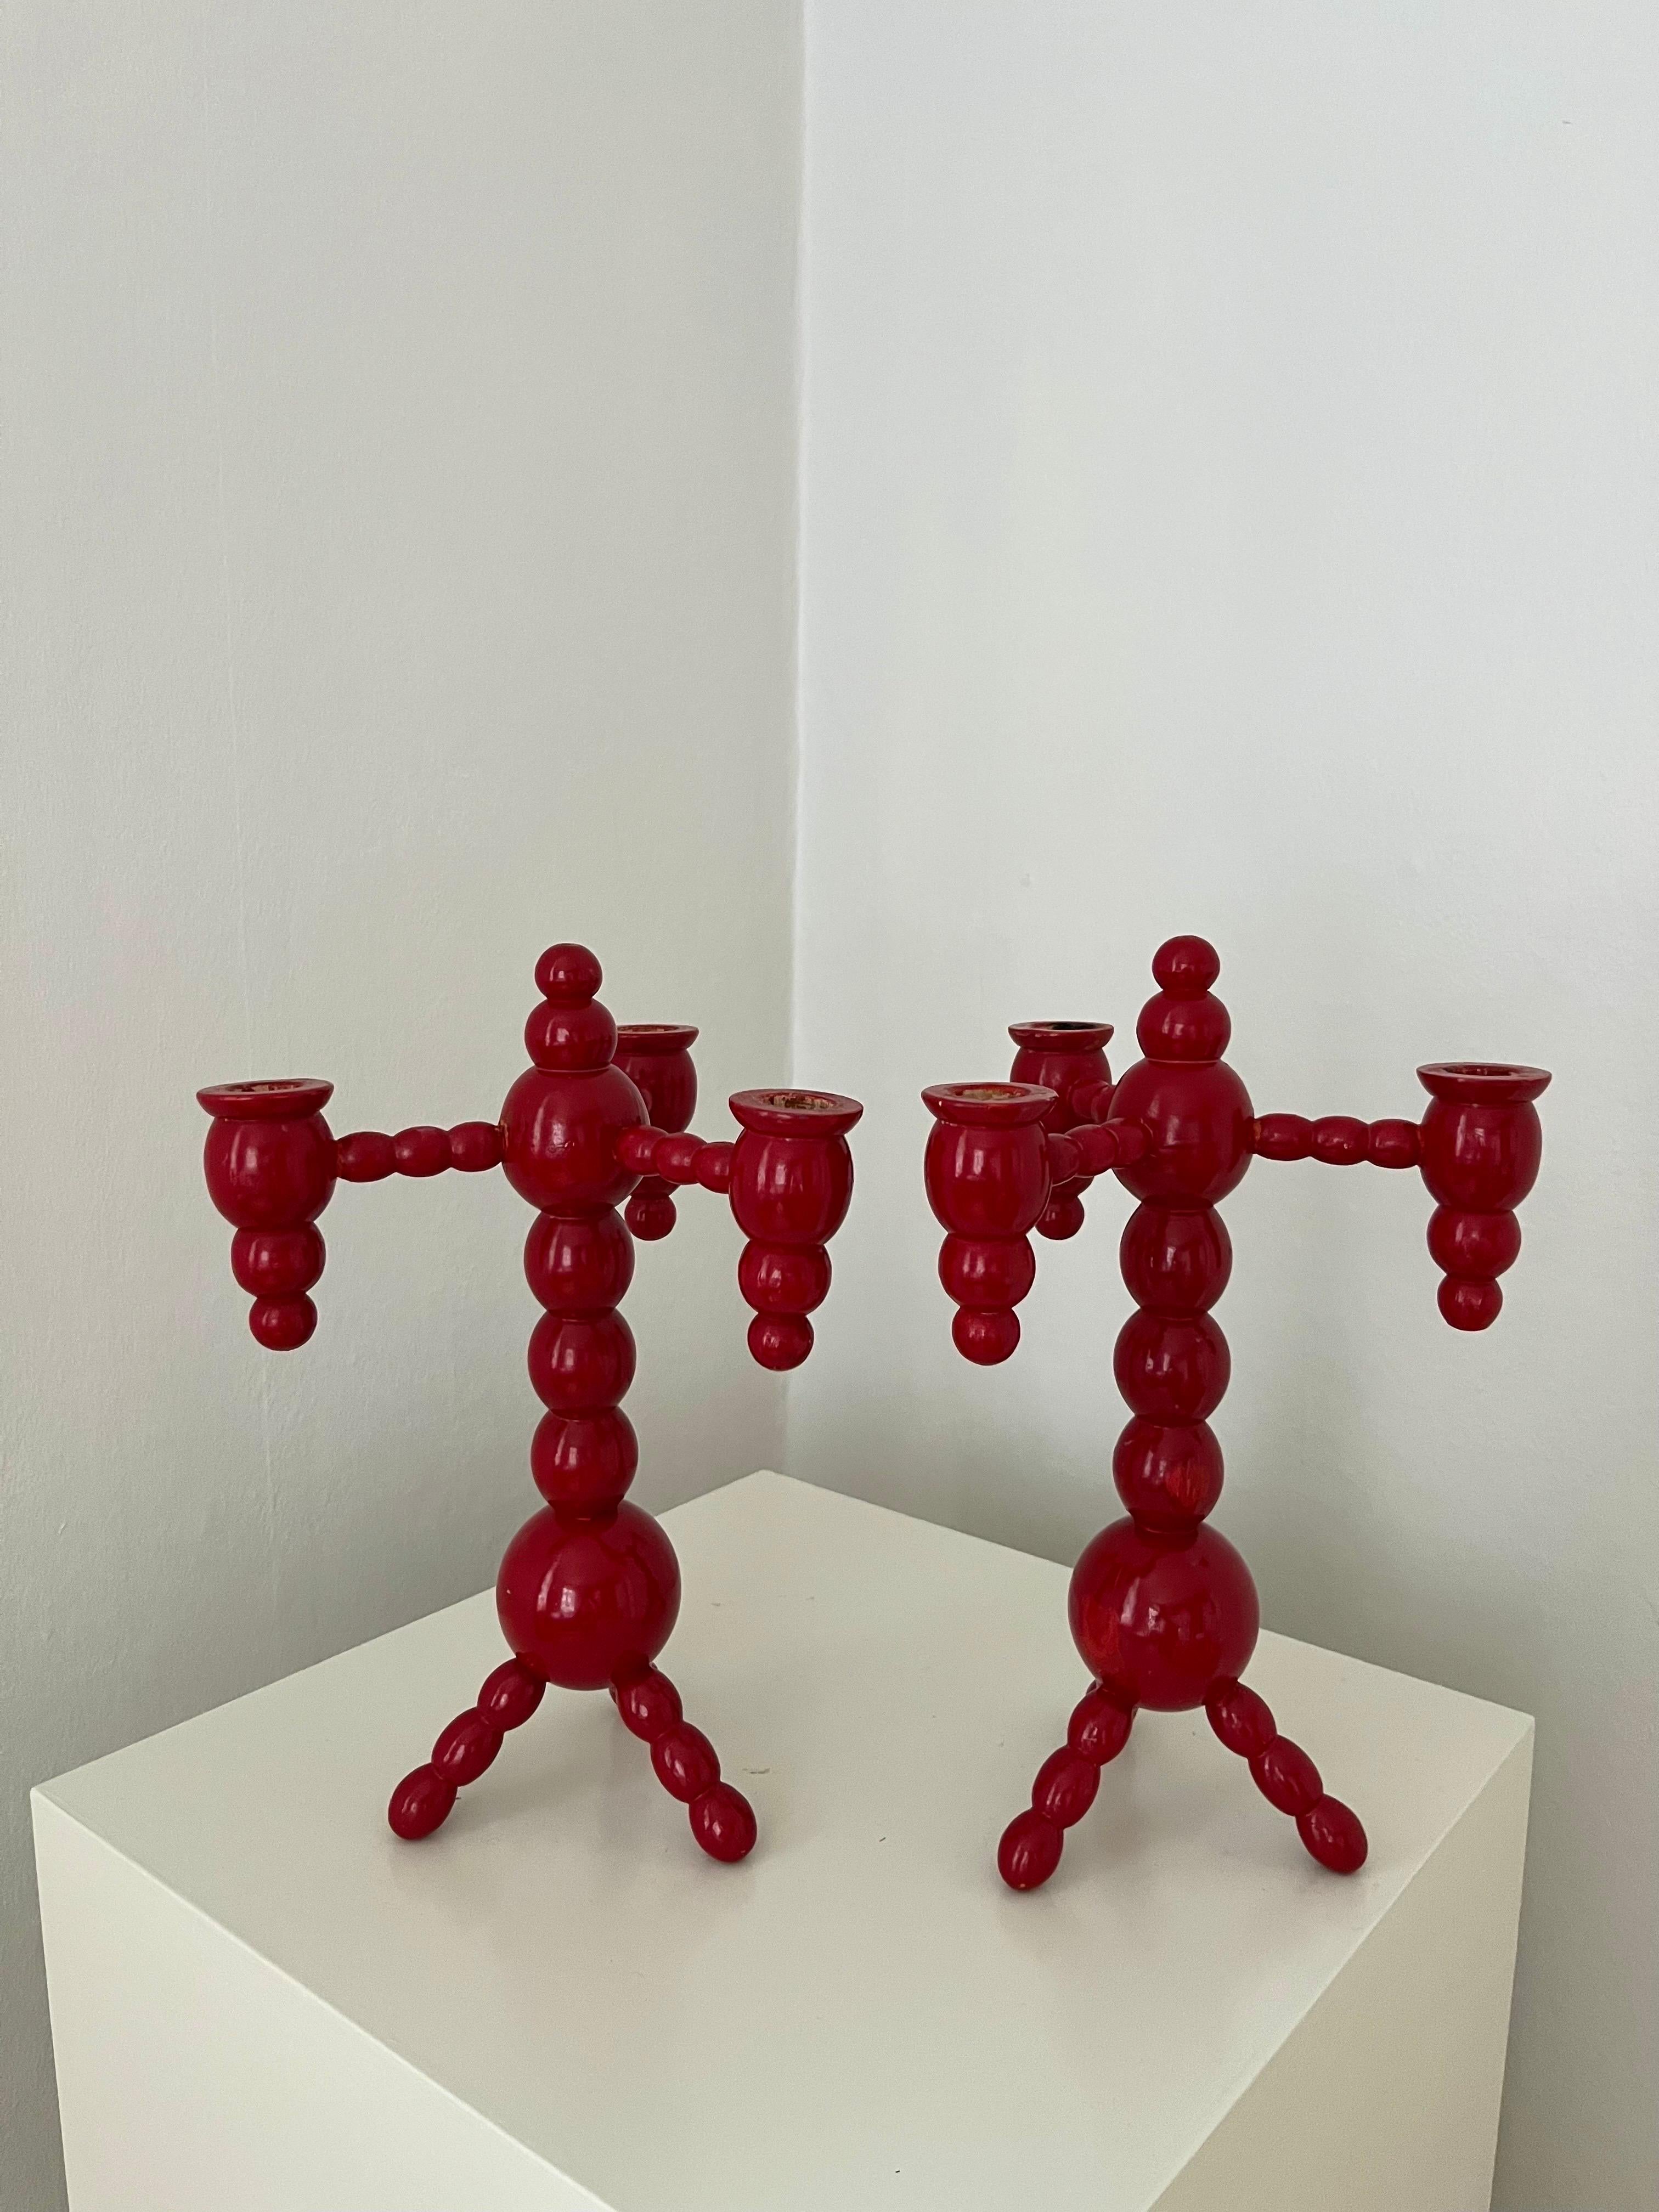 A pair of Swedish Christmas candelabras red painted wood bobbin 1970s. Each candelabra has 3 arms with a candle holder. Glossy red, bobbin style, 3 legs.
One of them signed with initials and '75 (for made in 1975). 
One with burn marks from candles